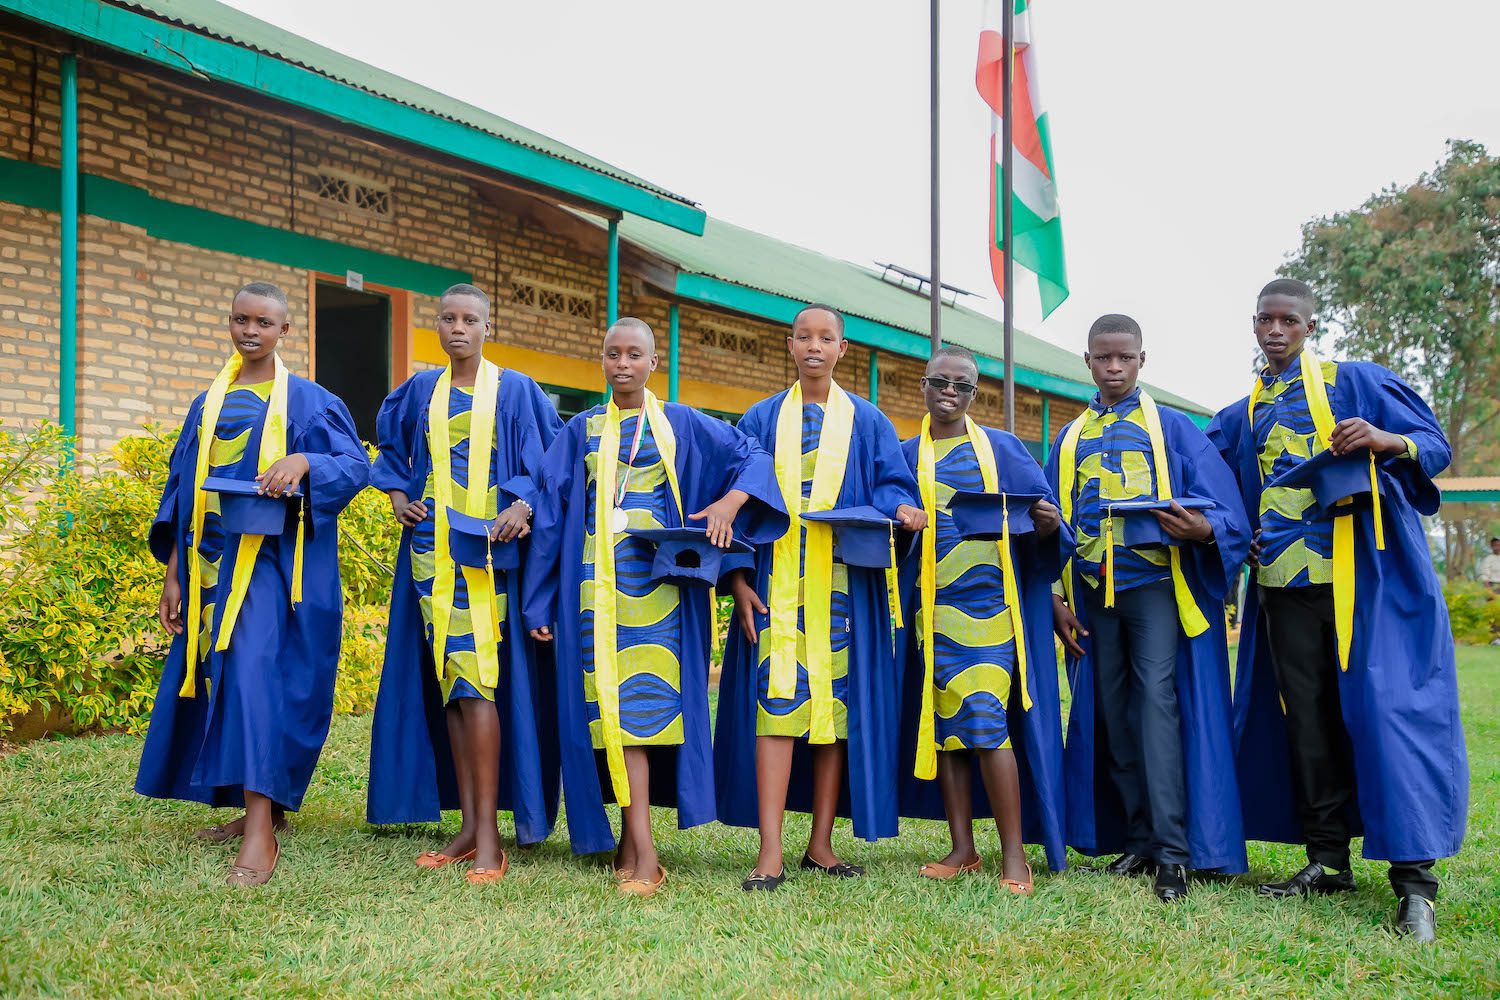 group of graduates in blue and yellow gowns